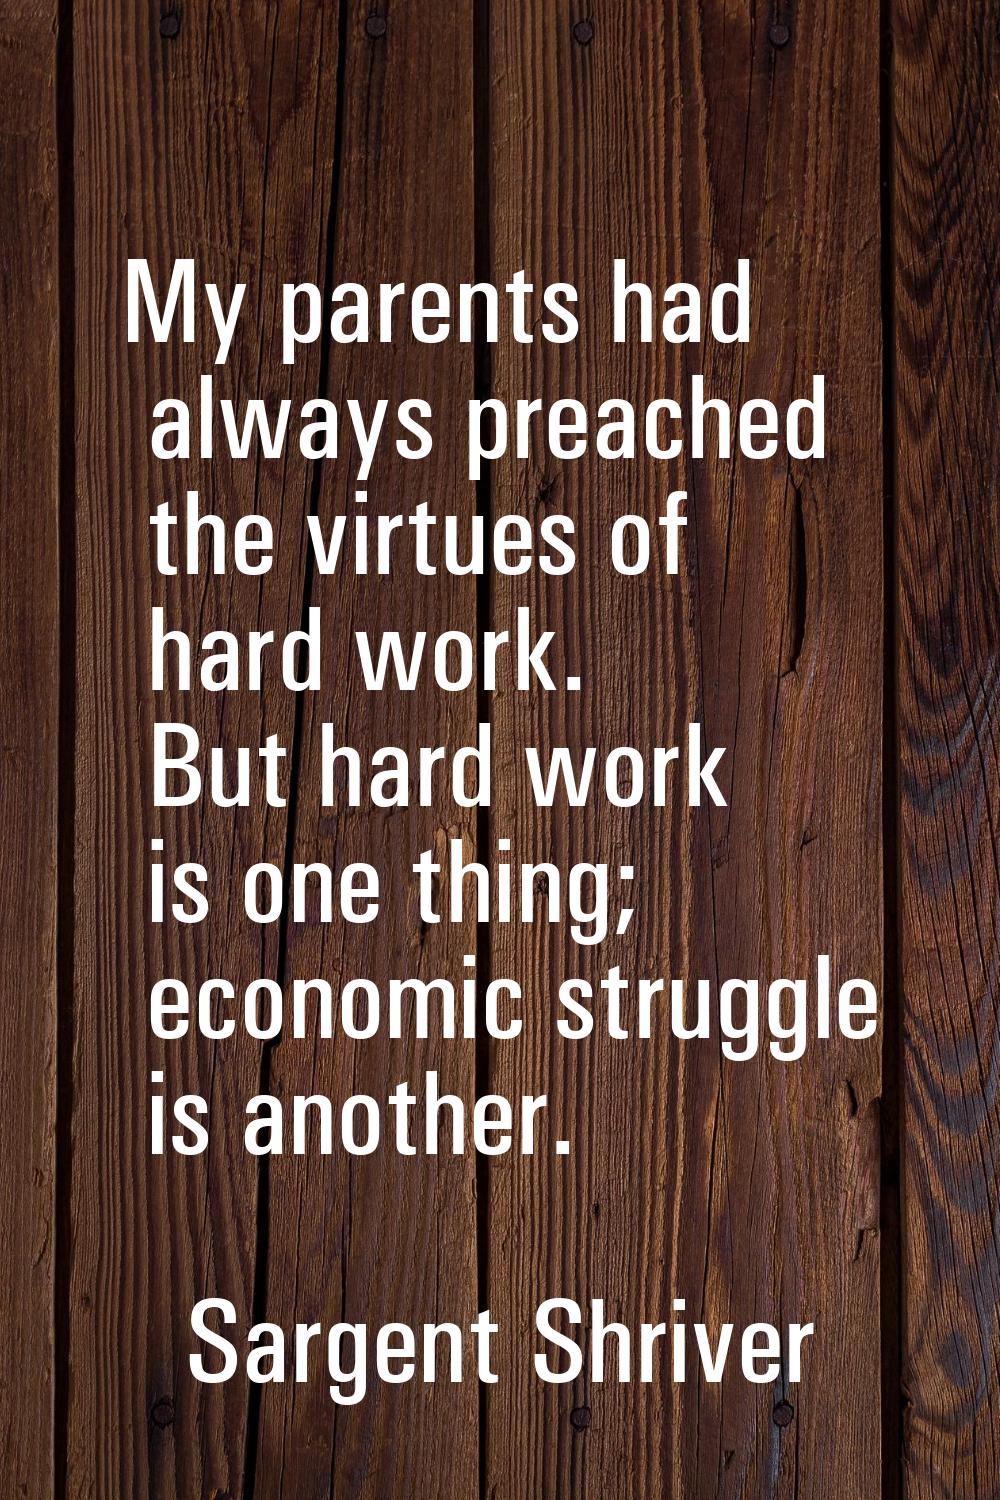 My parents had always preached the virtues of hard work. But hard work is one thing; economic strug